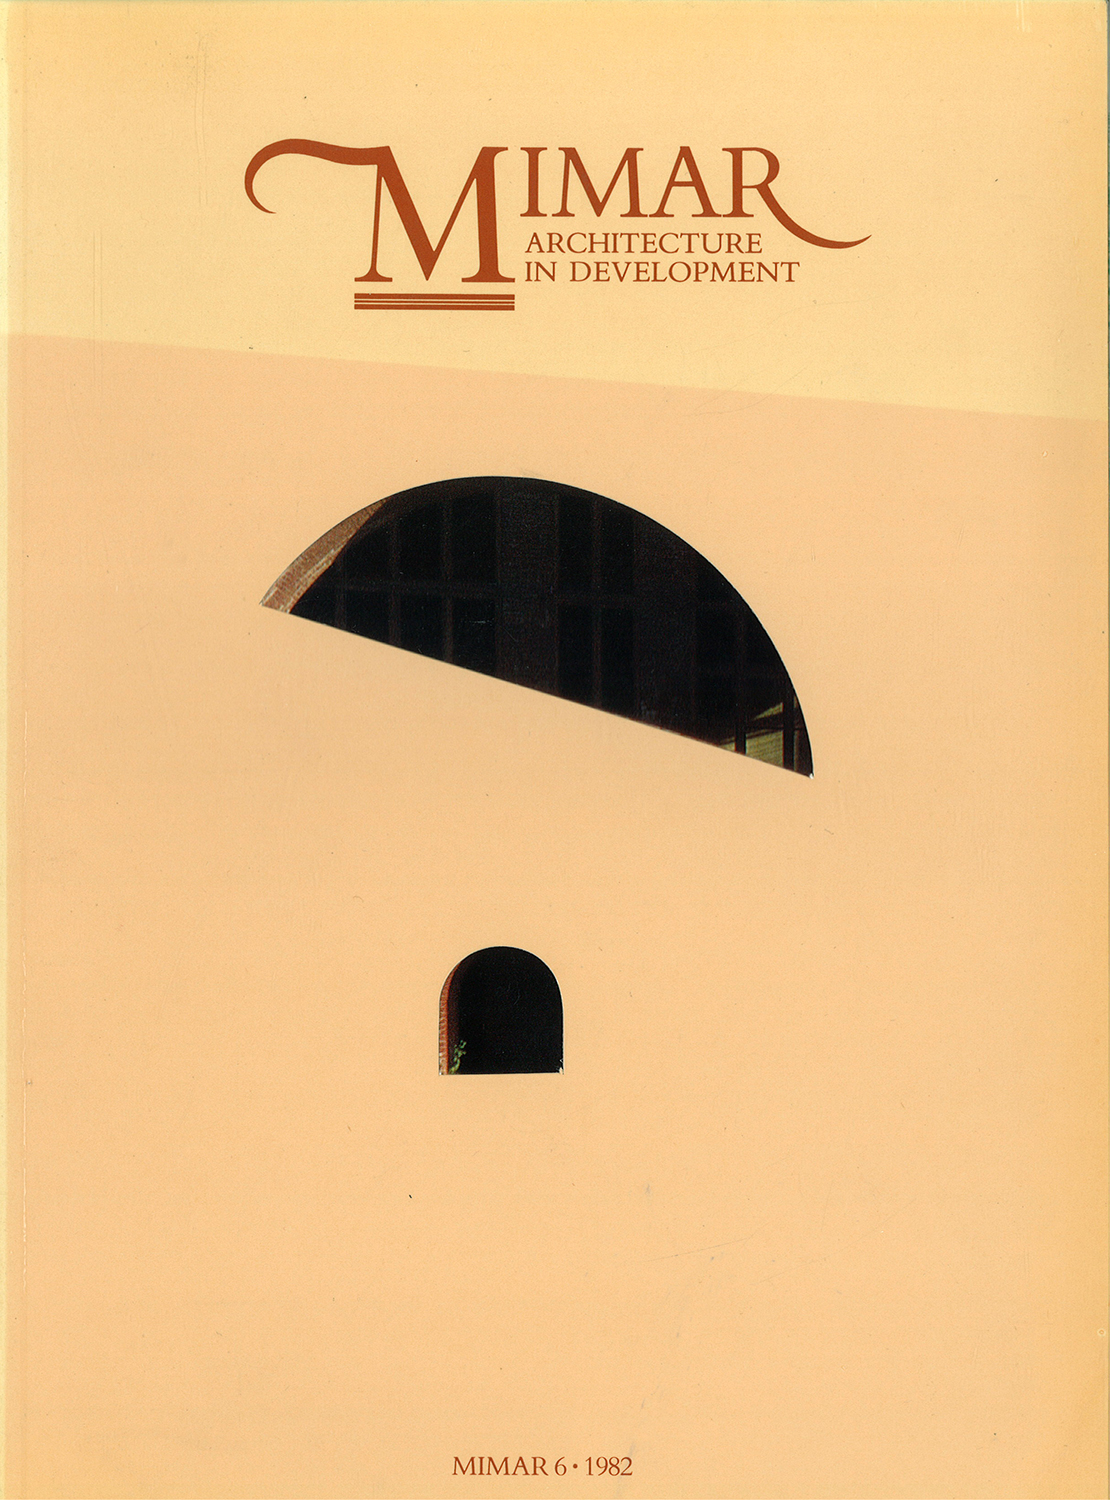 Hasan-Uddin Khan - Mimar: Architecture in Development was first published in 1981 and had a print run of 43 issues. At the time of Mimar's inception, it was the only international architecture magazine focusing on architecture in the developing world and related issues of concern. It aimed at exchanging ideas and images between countries which are developing new directions for their built environment. Mimar has been and continues to be one of the most requested resources on Archnet.